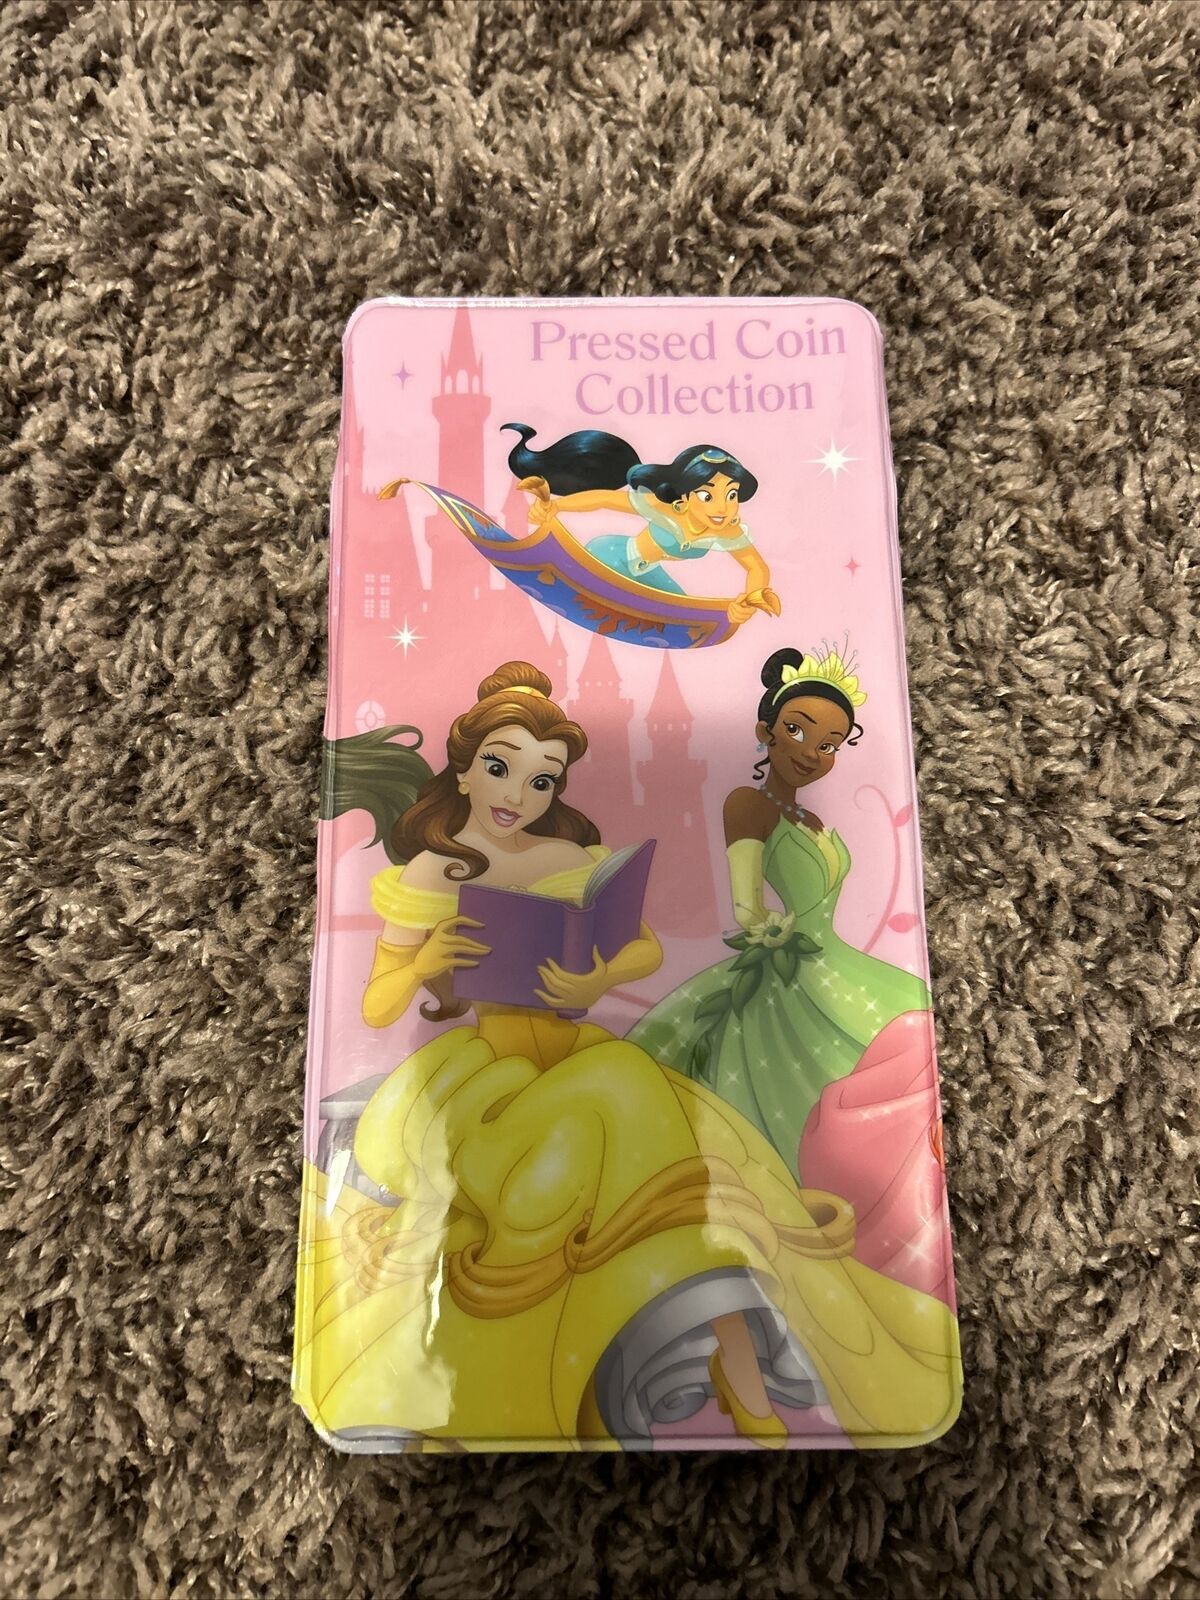 Disney Princess Pressed Coin Collection Holder